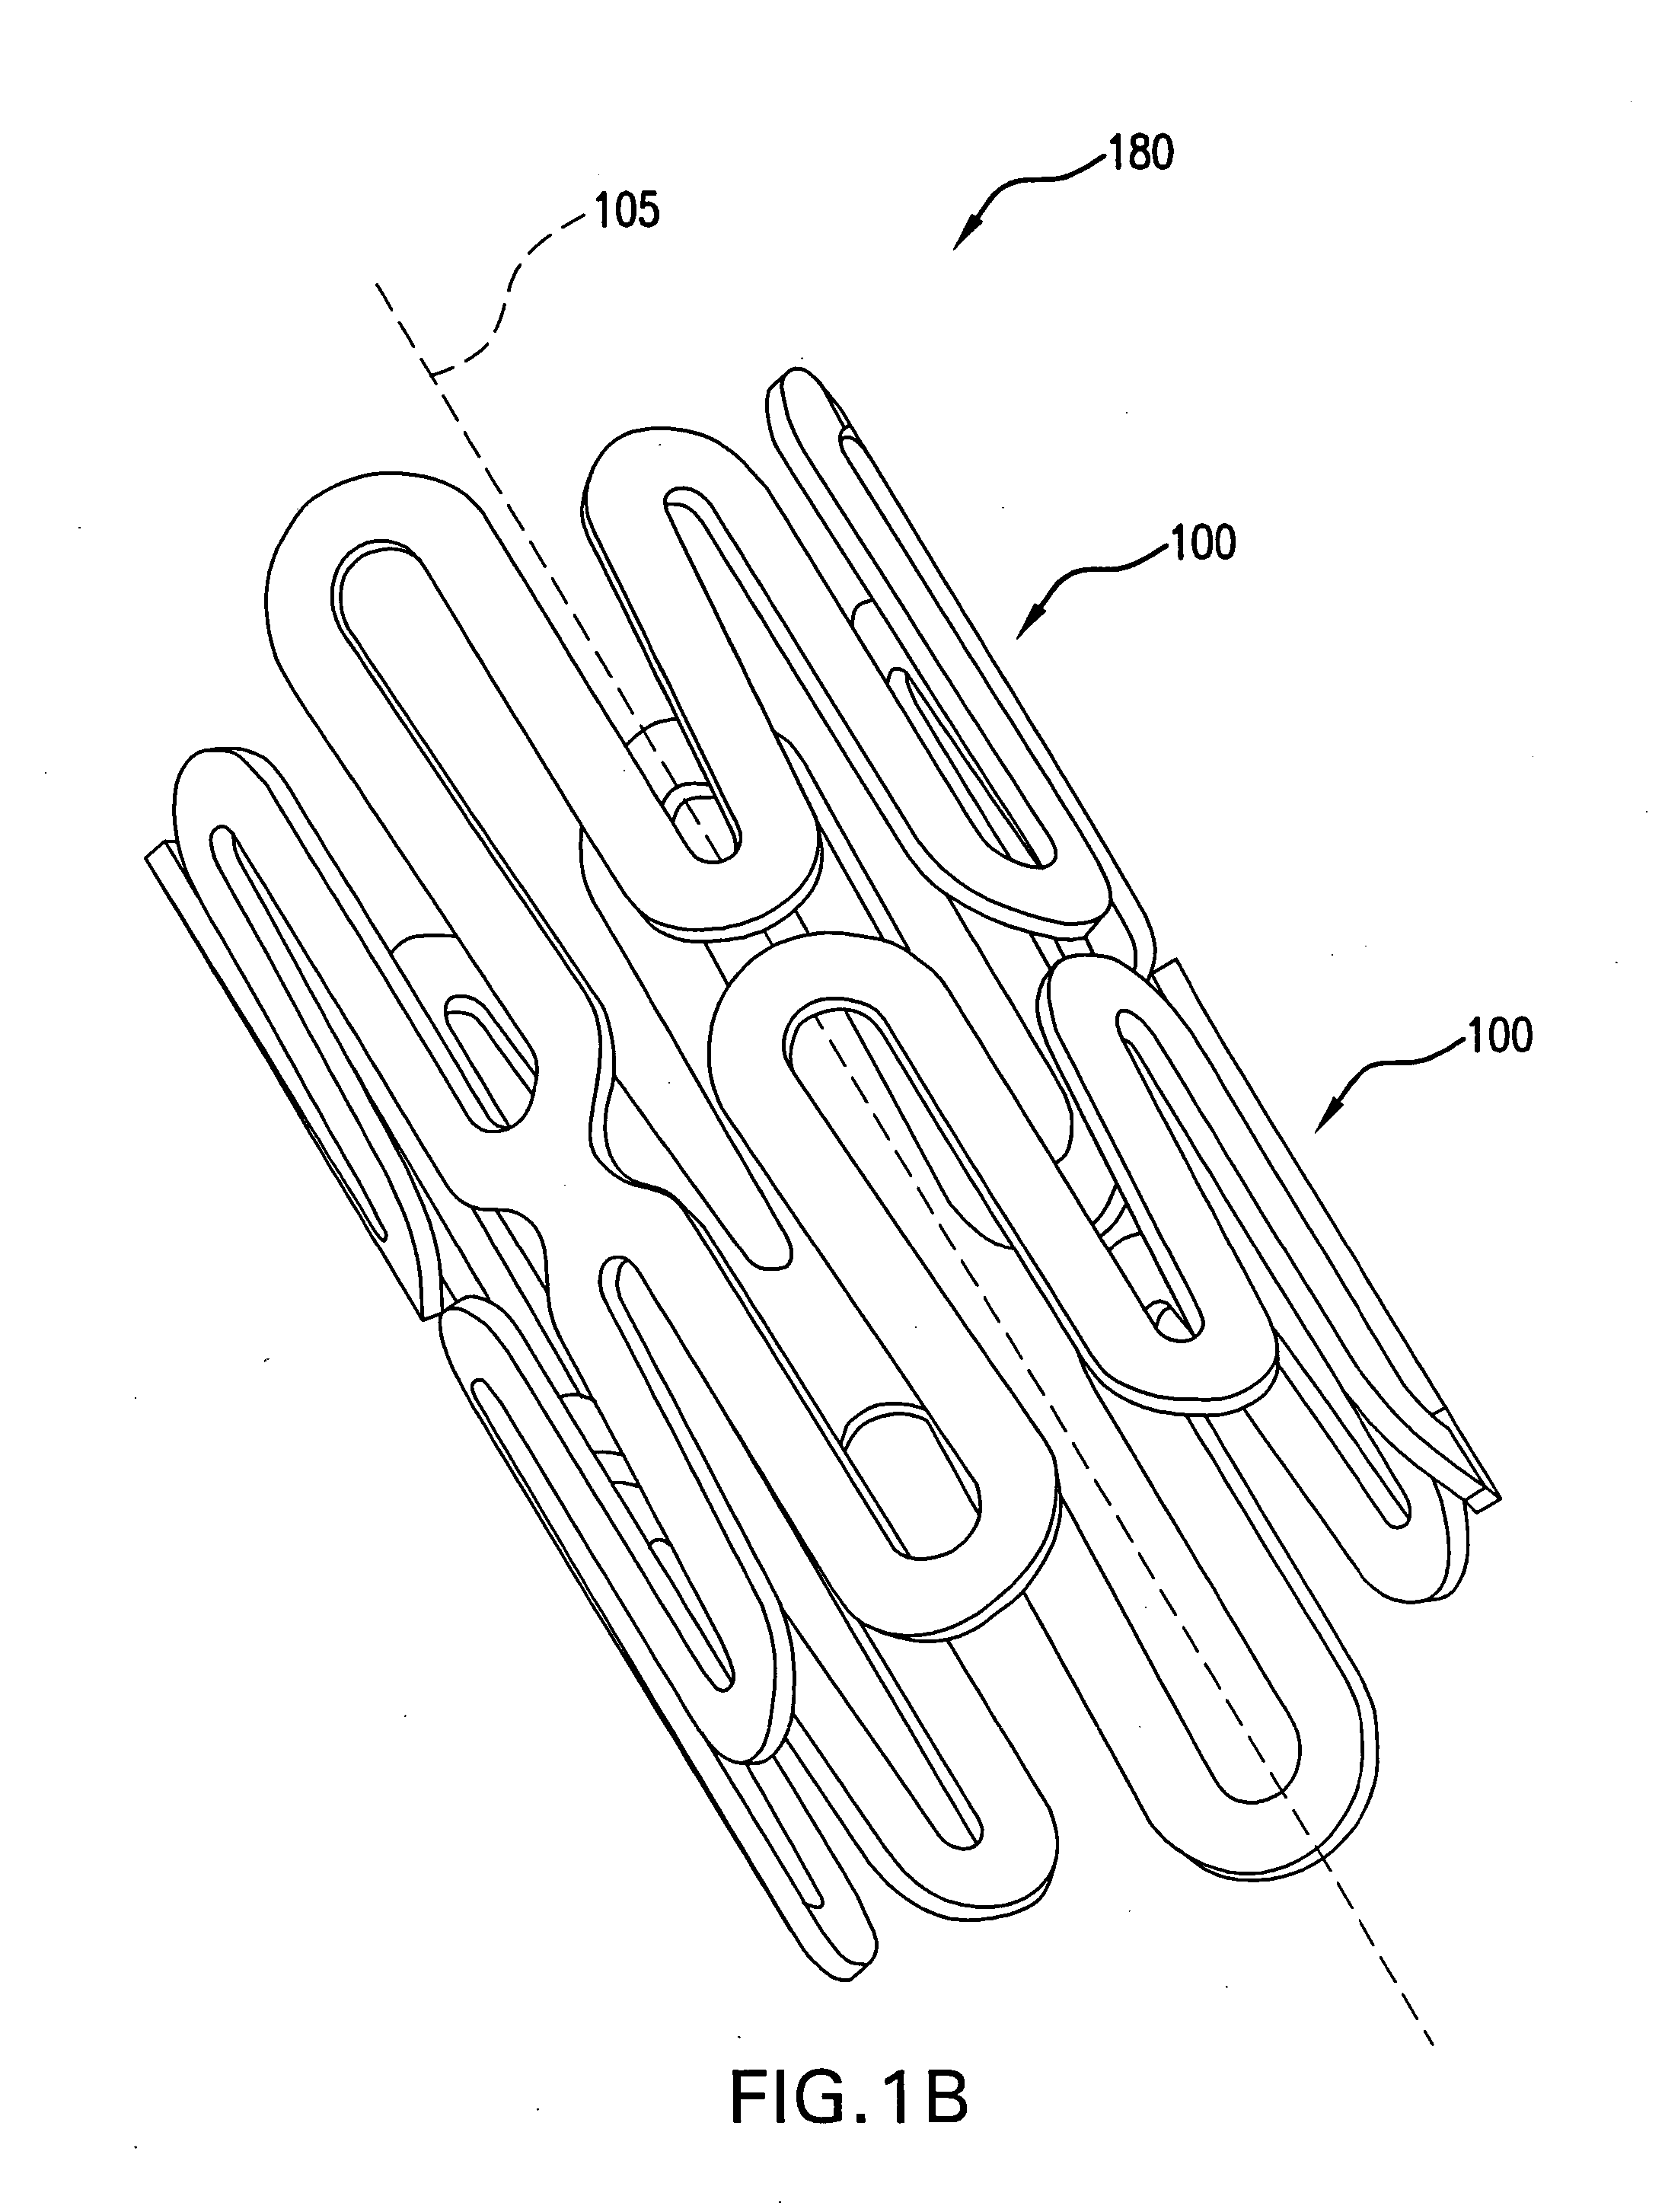 Intralumenal stent device for use in body lumens of various diameters